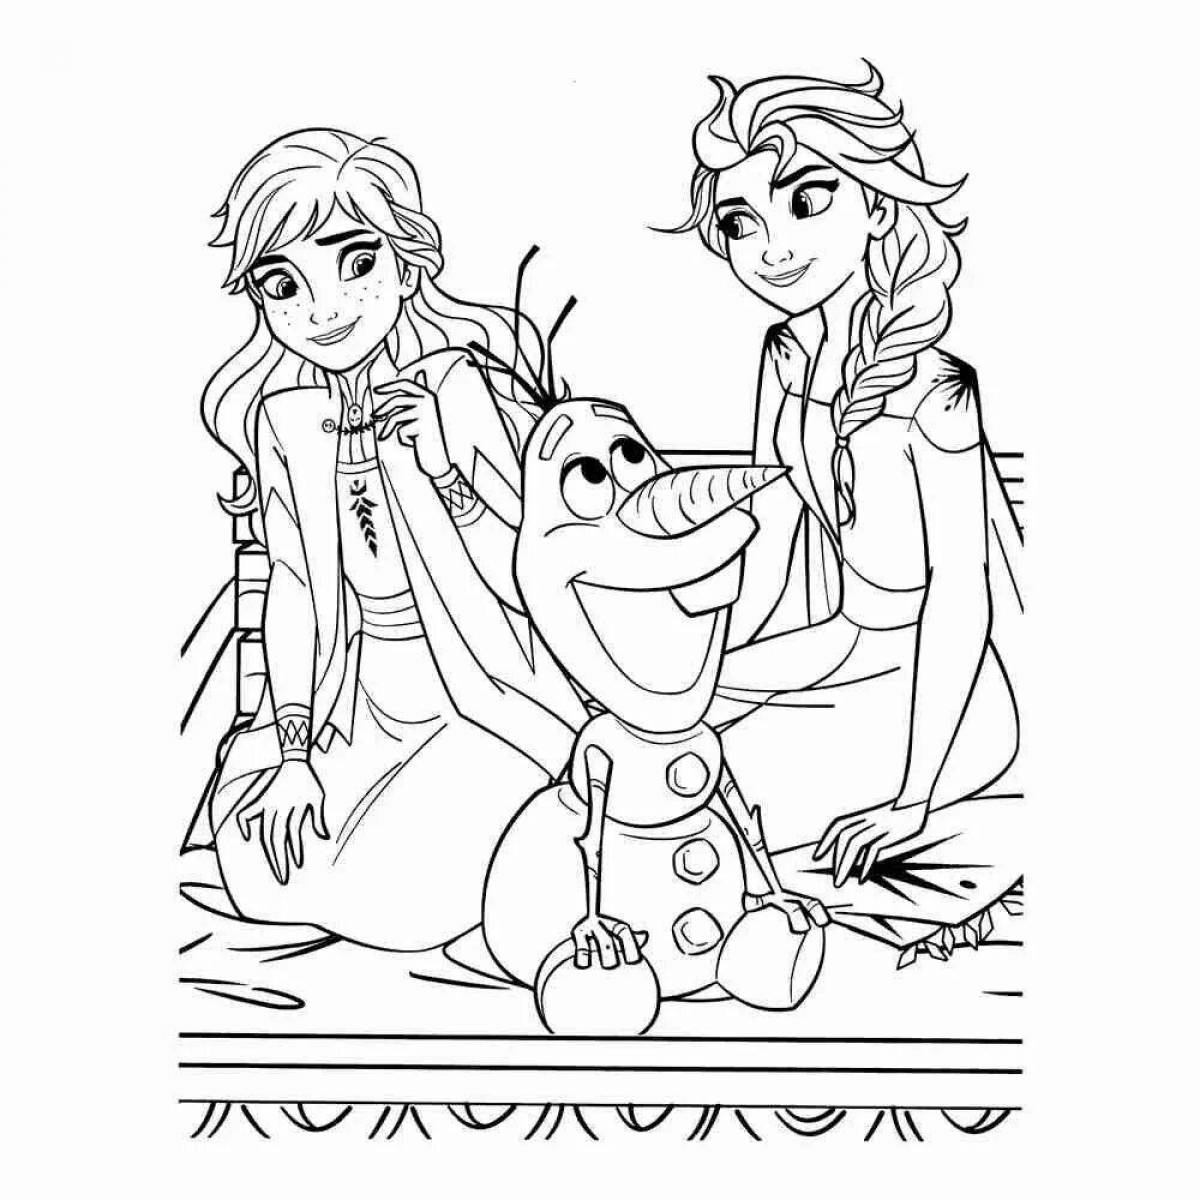 Elsa and olaf shining coloring book